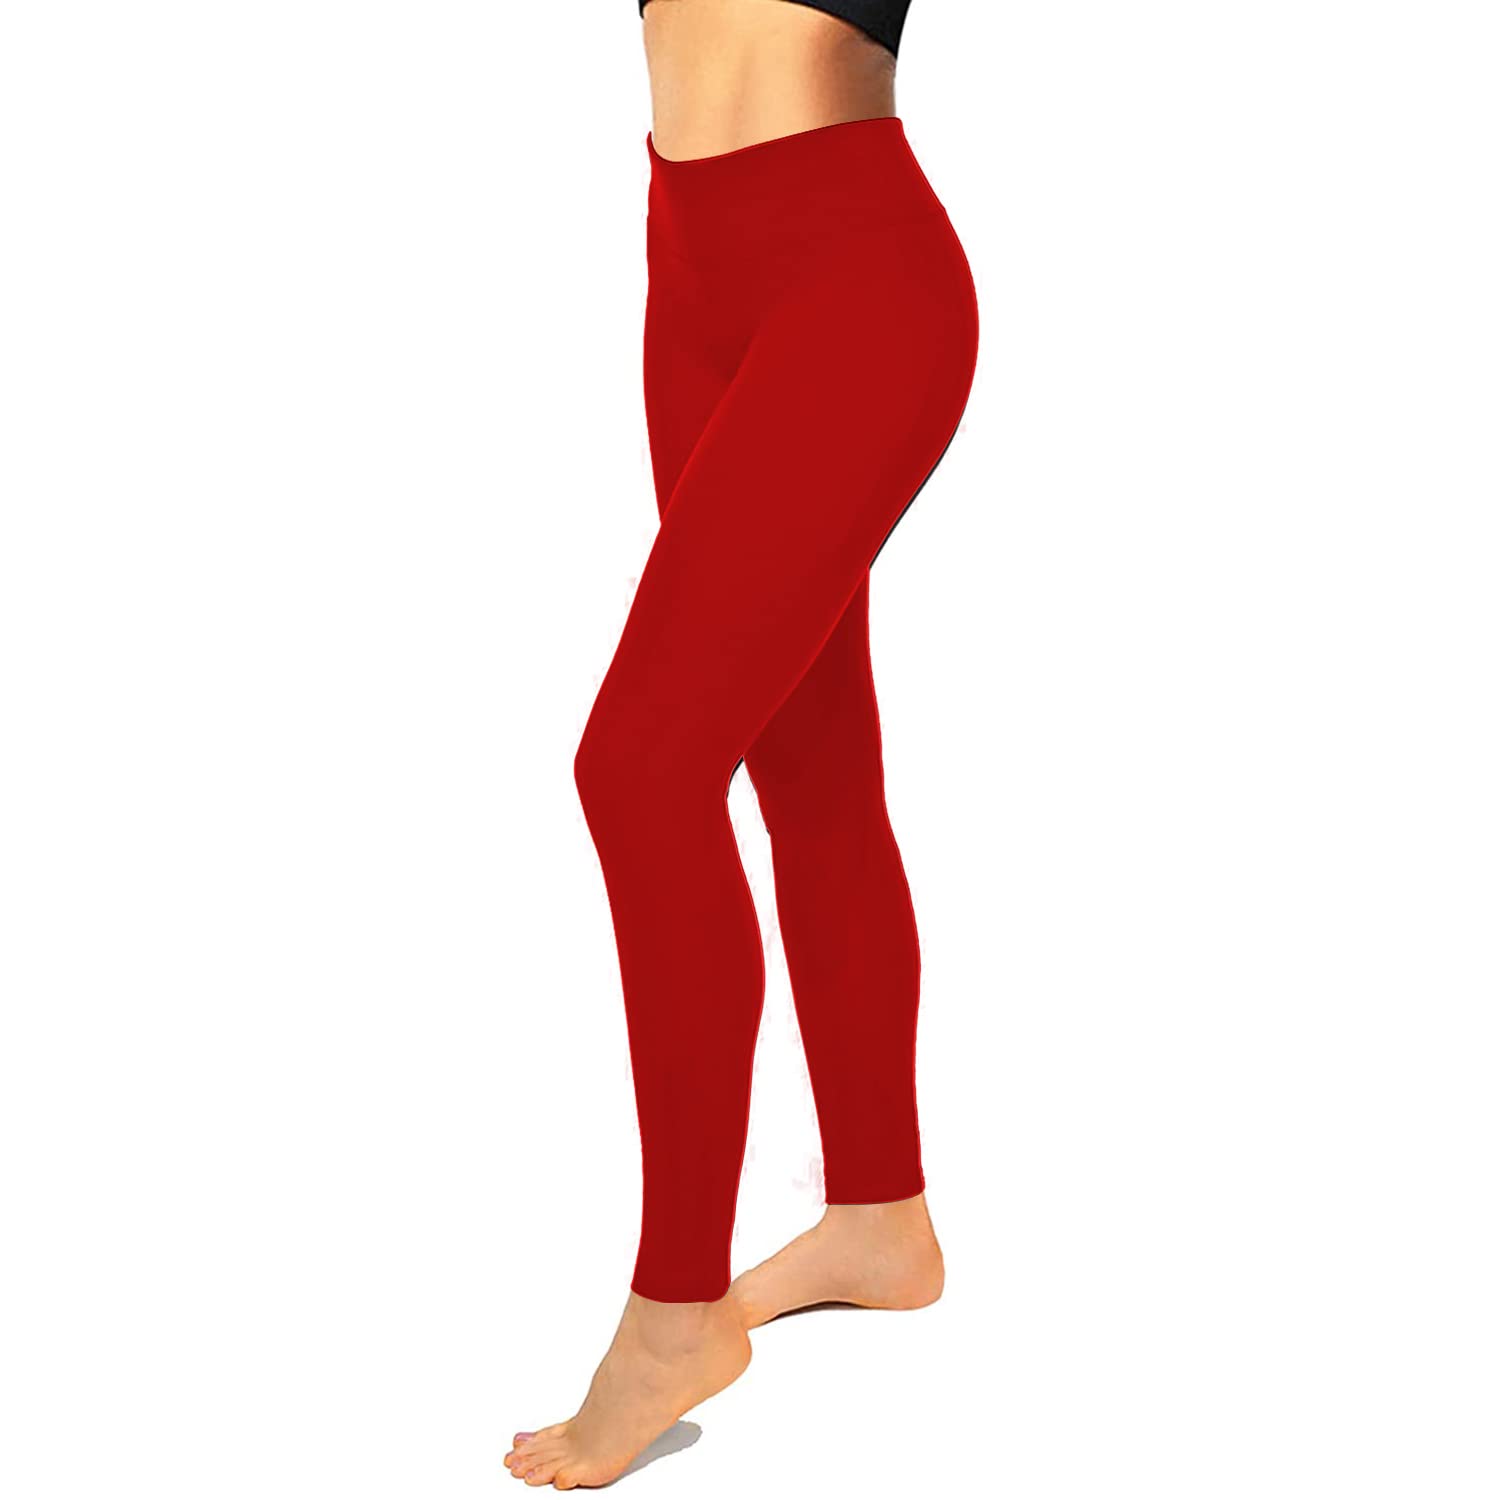 High Waist Black Push Up Red Workout Leggings For Women NORMOV Gym Fitness  Workout Sports Casual Legins Mujer 211008 From Lu006, $10.2